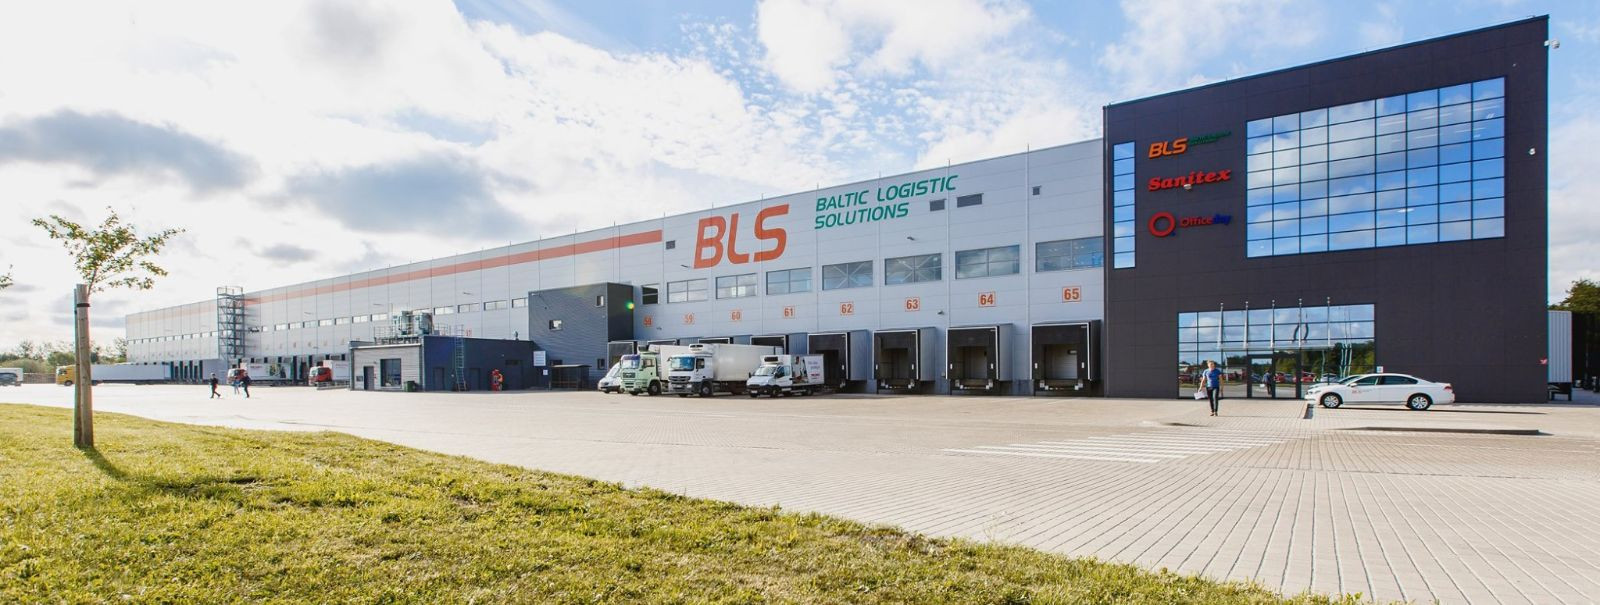 At BALTIC LOGISTIC SOLUTIONS OÜ, we understand that the backbone of any thriving business is its ability to efficiently move goods from point A to point B. That